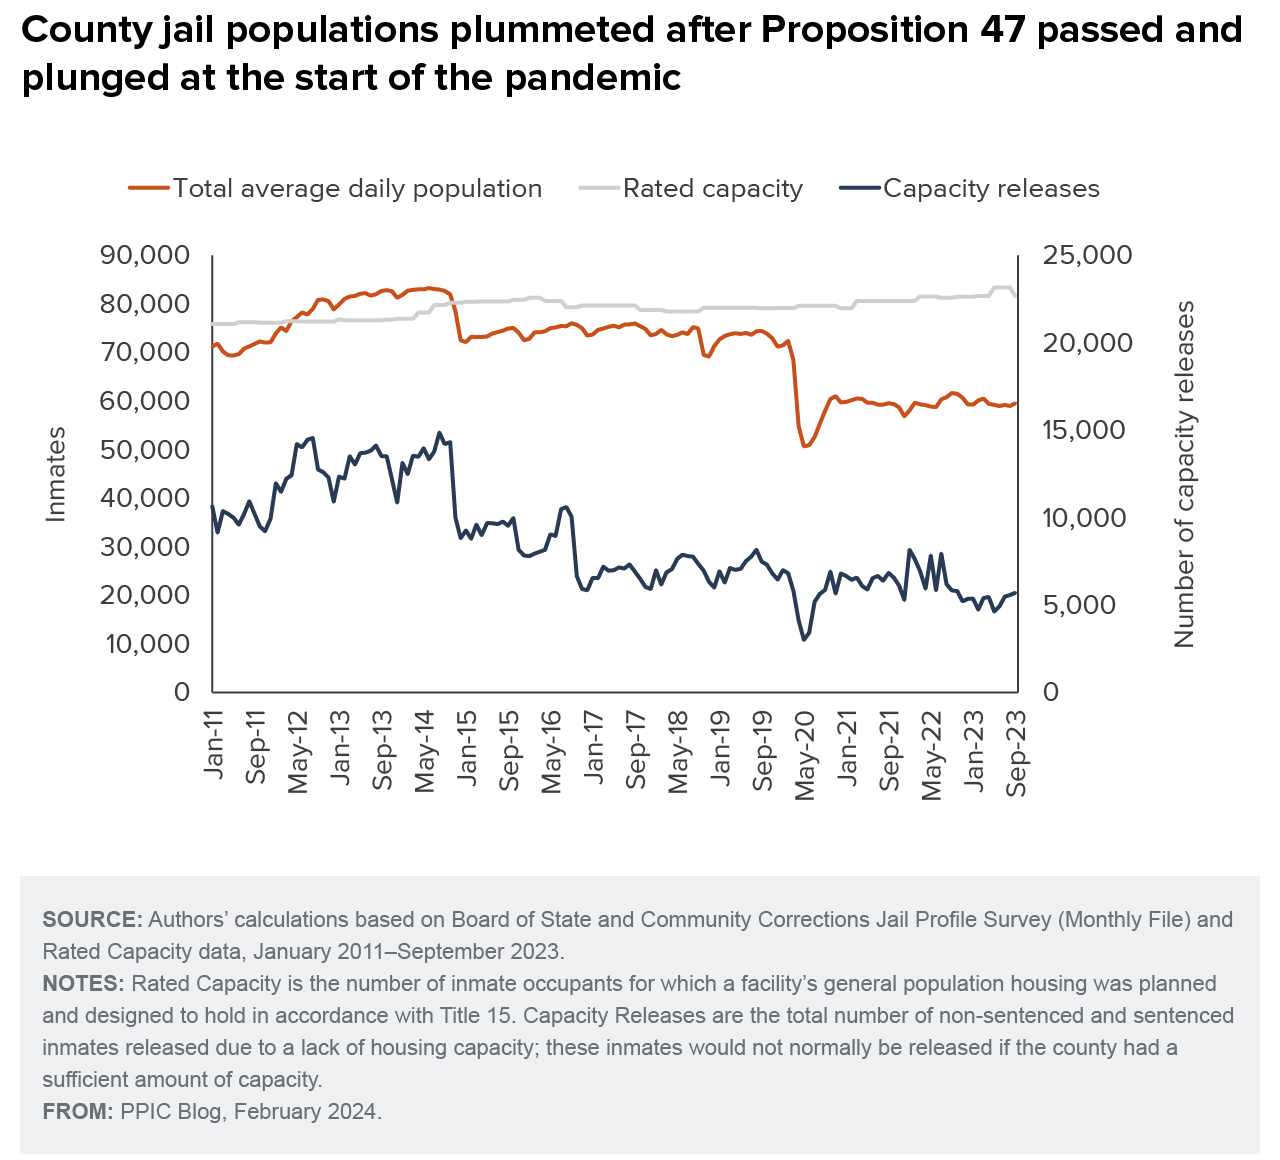 figure - County jail populations plummeted after Proposition 47 passed and plunged at the start of the pandemic